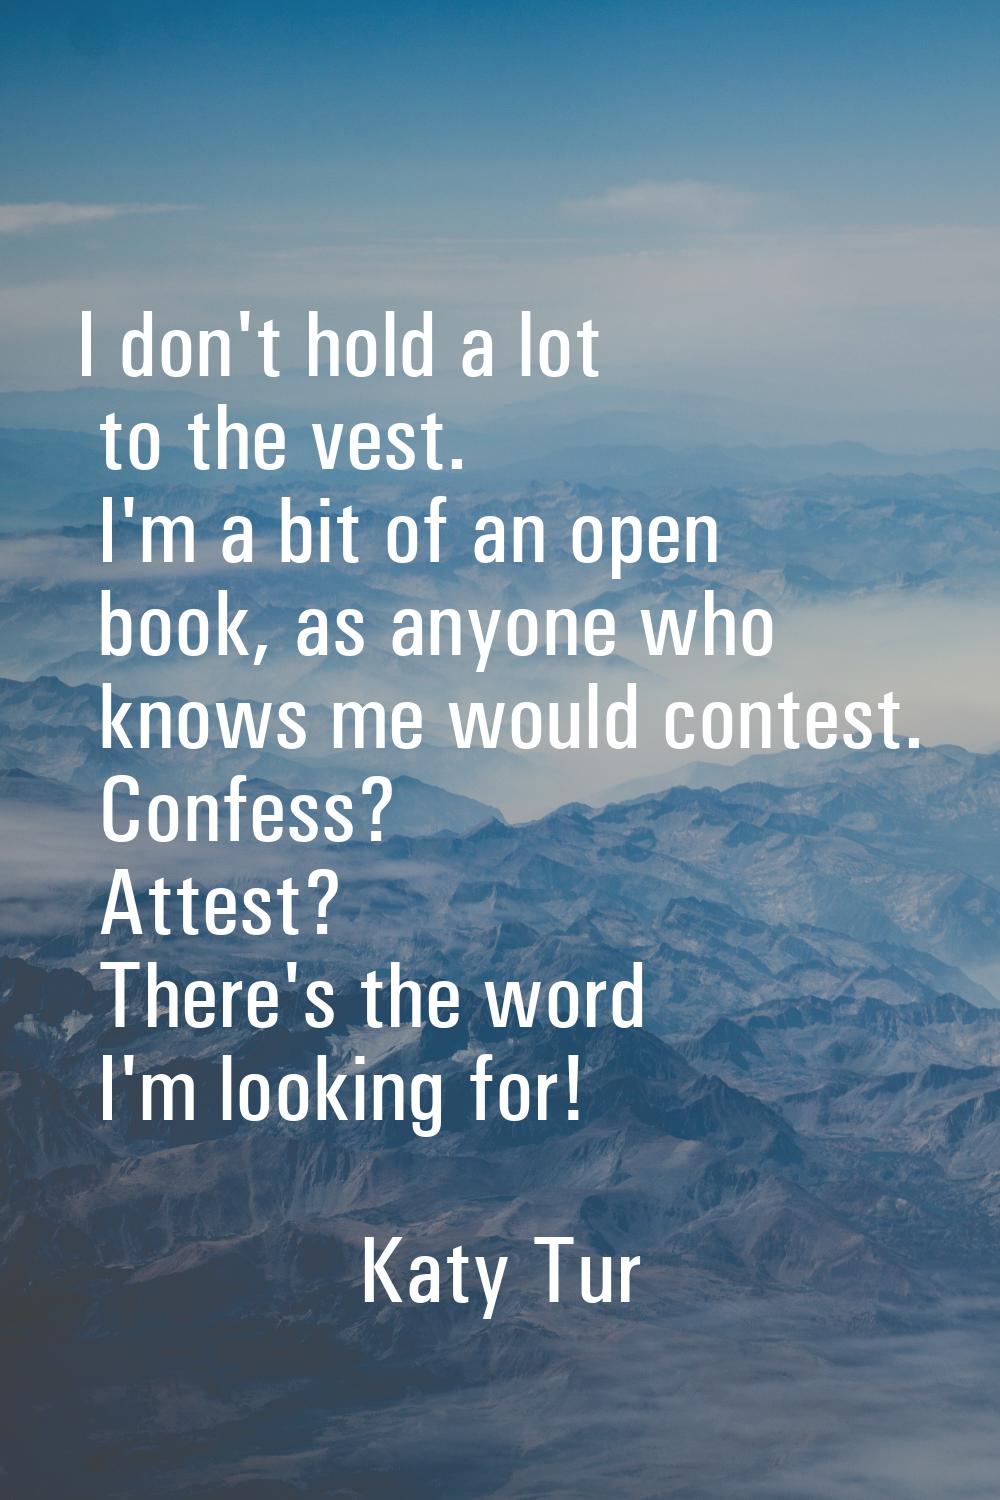 I don't hold a lot to the vest. I'm a bit of an open book, as anyone who knows me would contest. Co